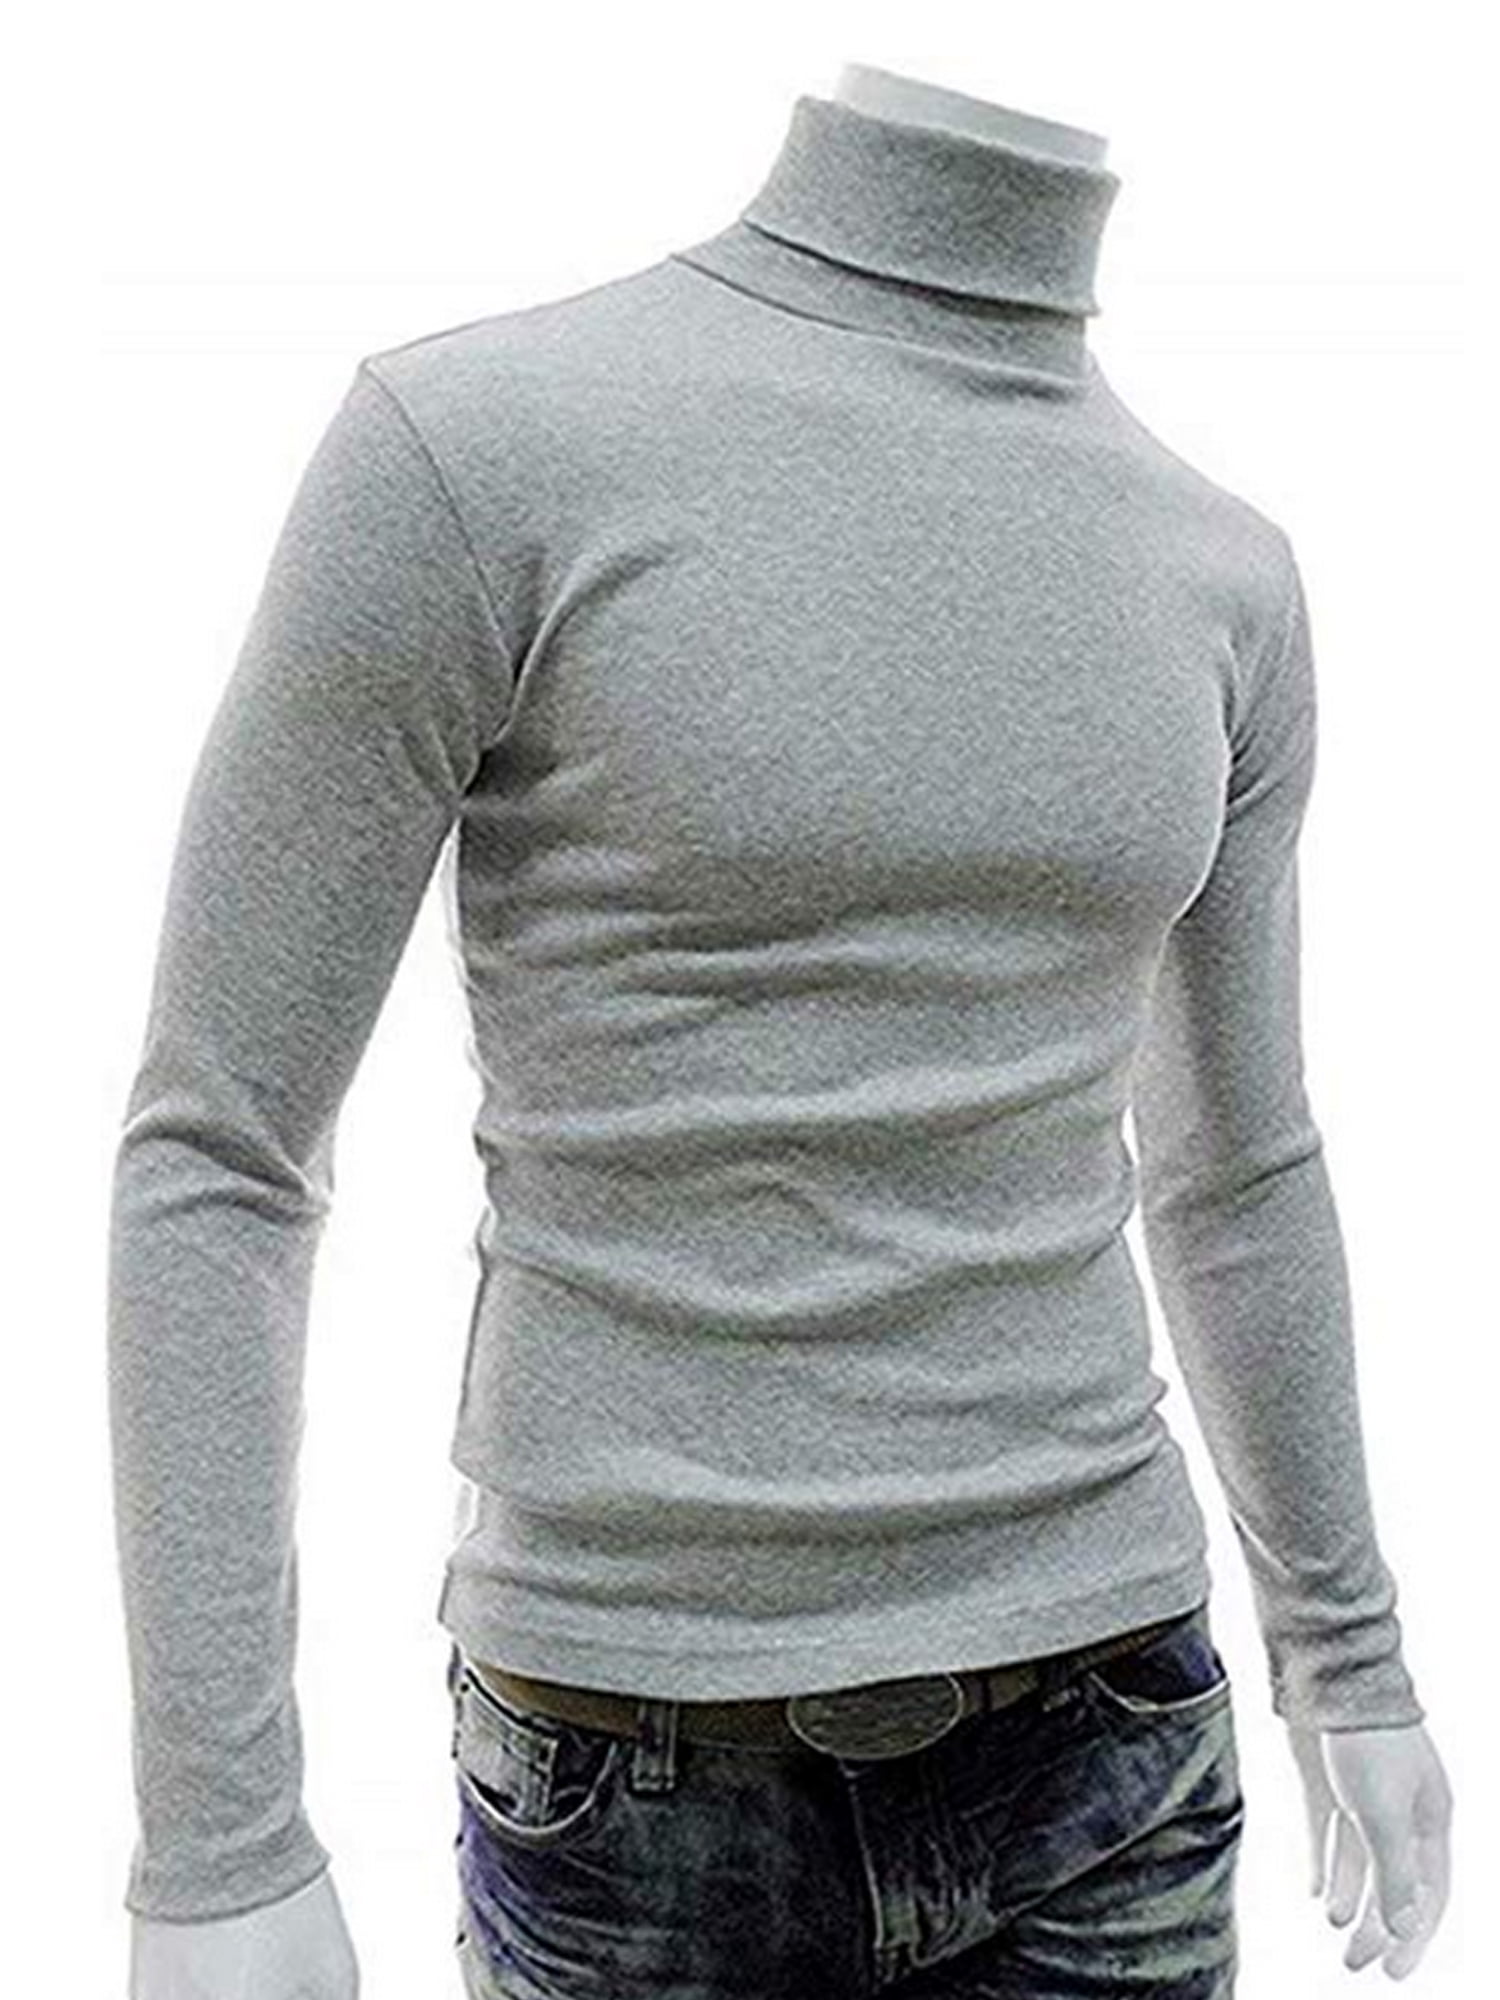 kaifongfu Mens Turtleneck Sweater Autumn Winter Pure Color Long Sleeve Pullover Blouse Top